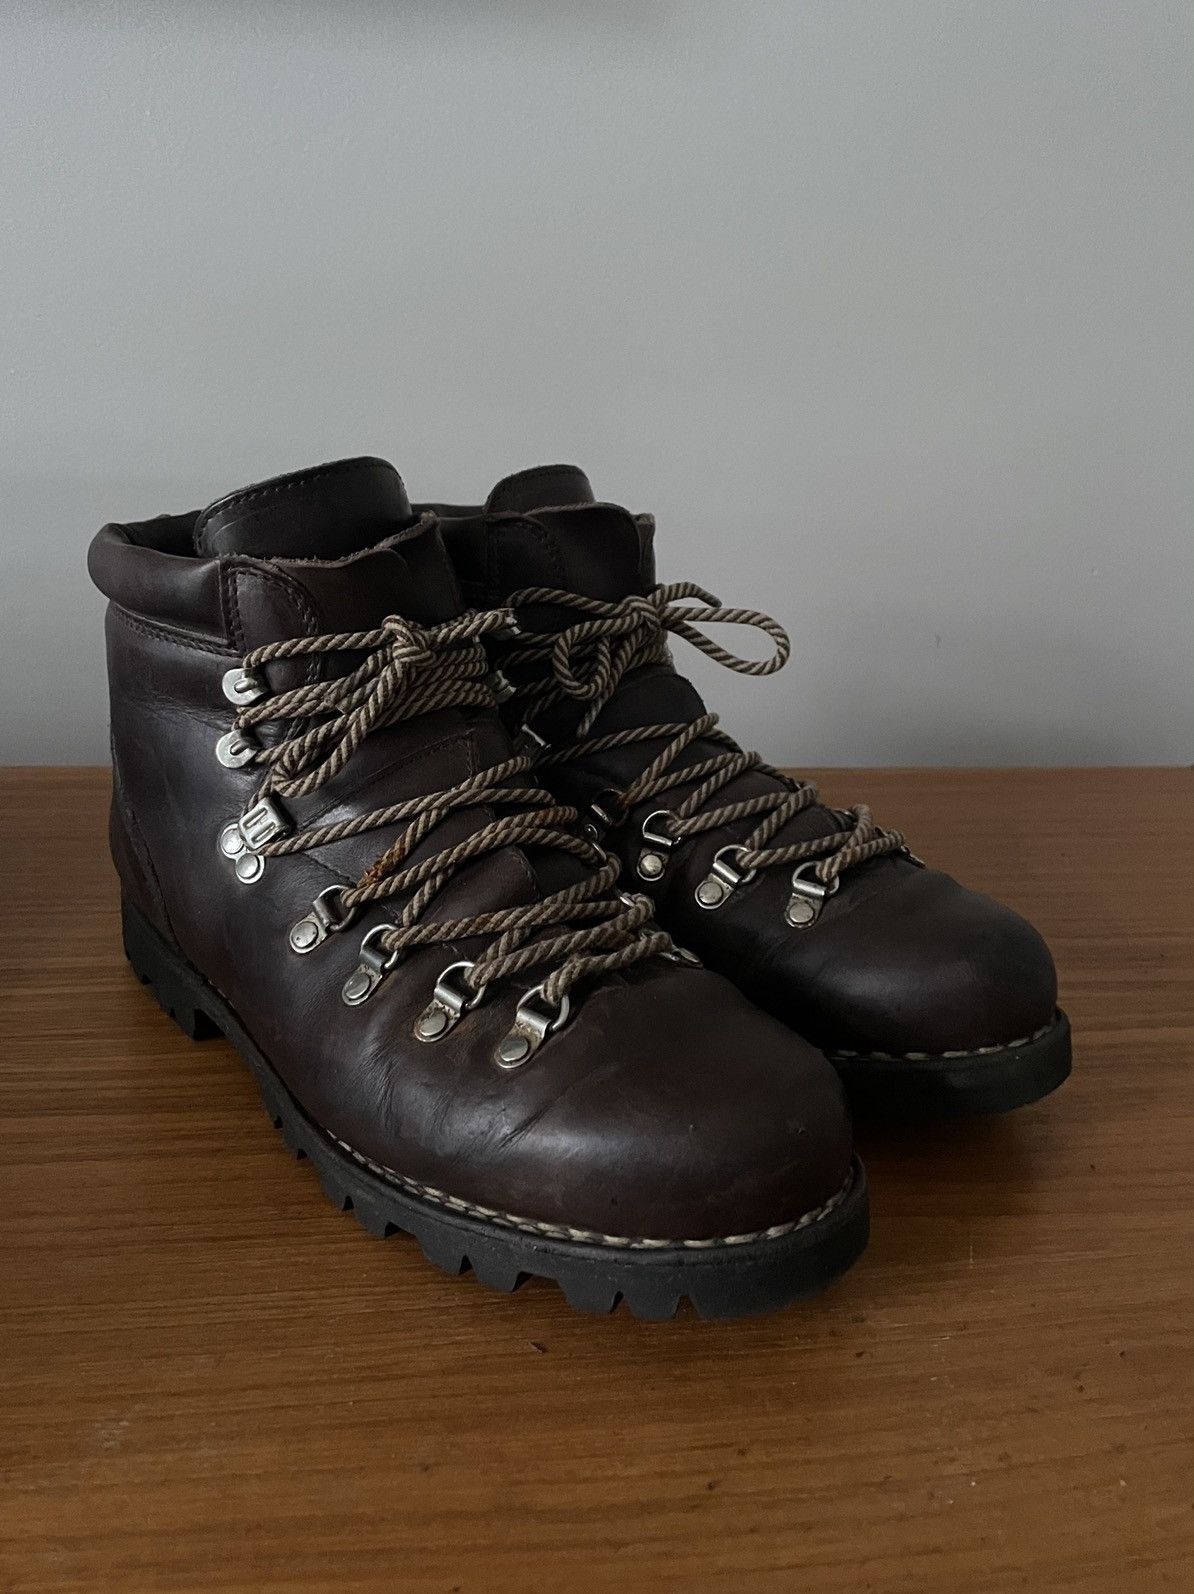 Paraboot Avioraz/Jannu Leather Hiking Boot Size US 8 / EU 41 - 1 Preview